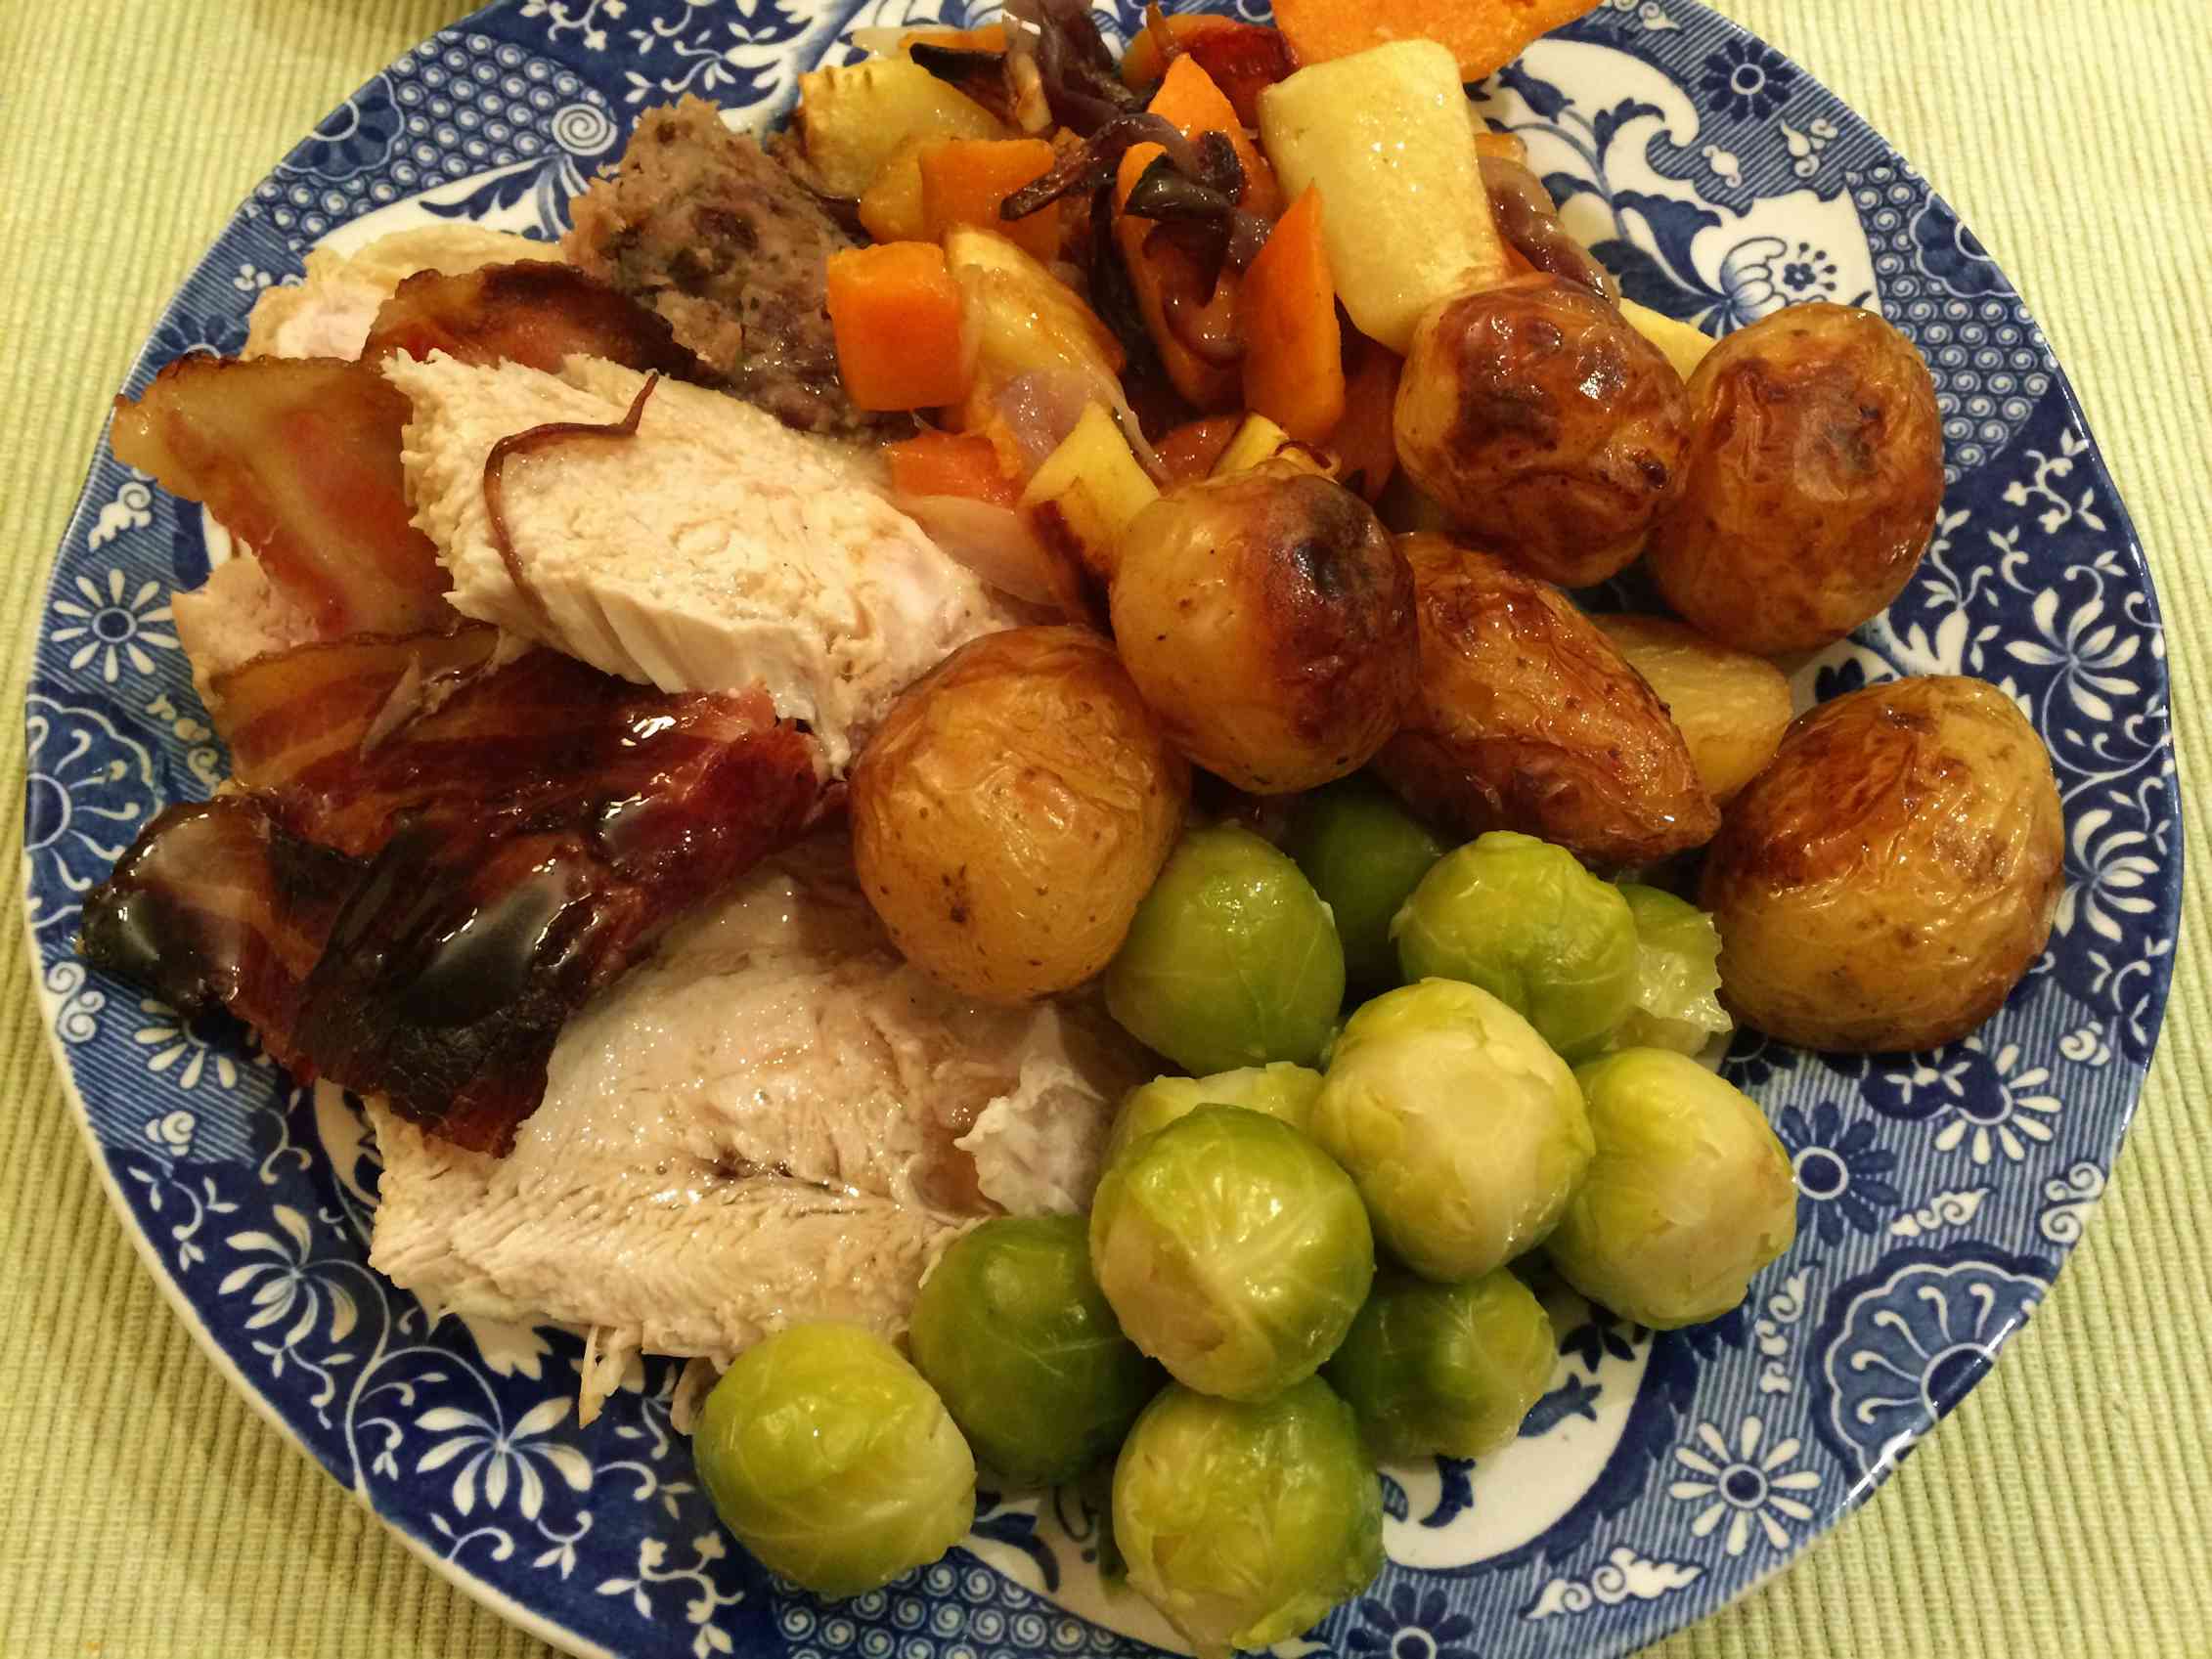 A plate with turkey and assorted vegetables